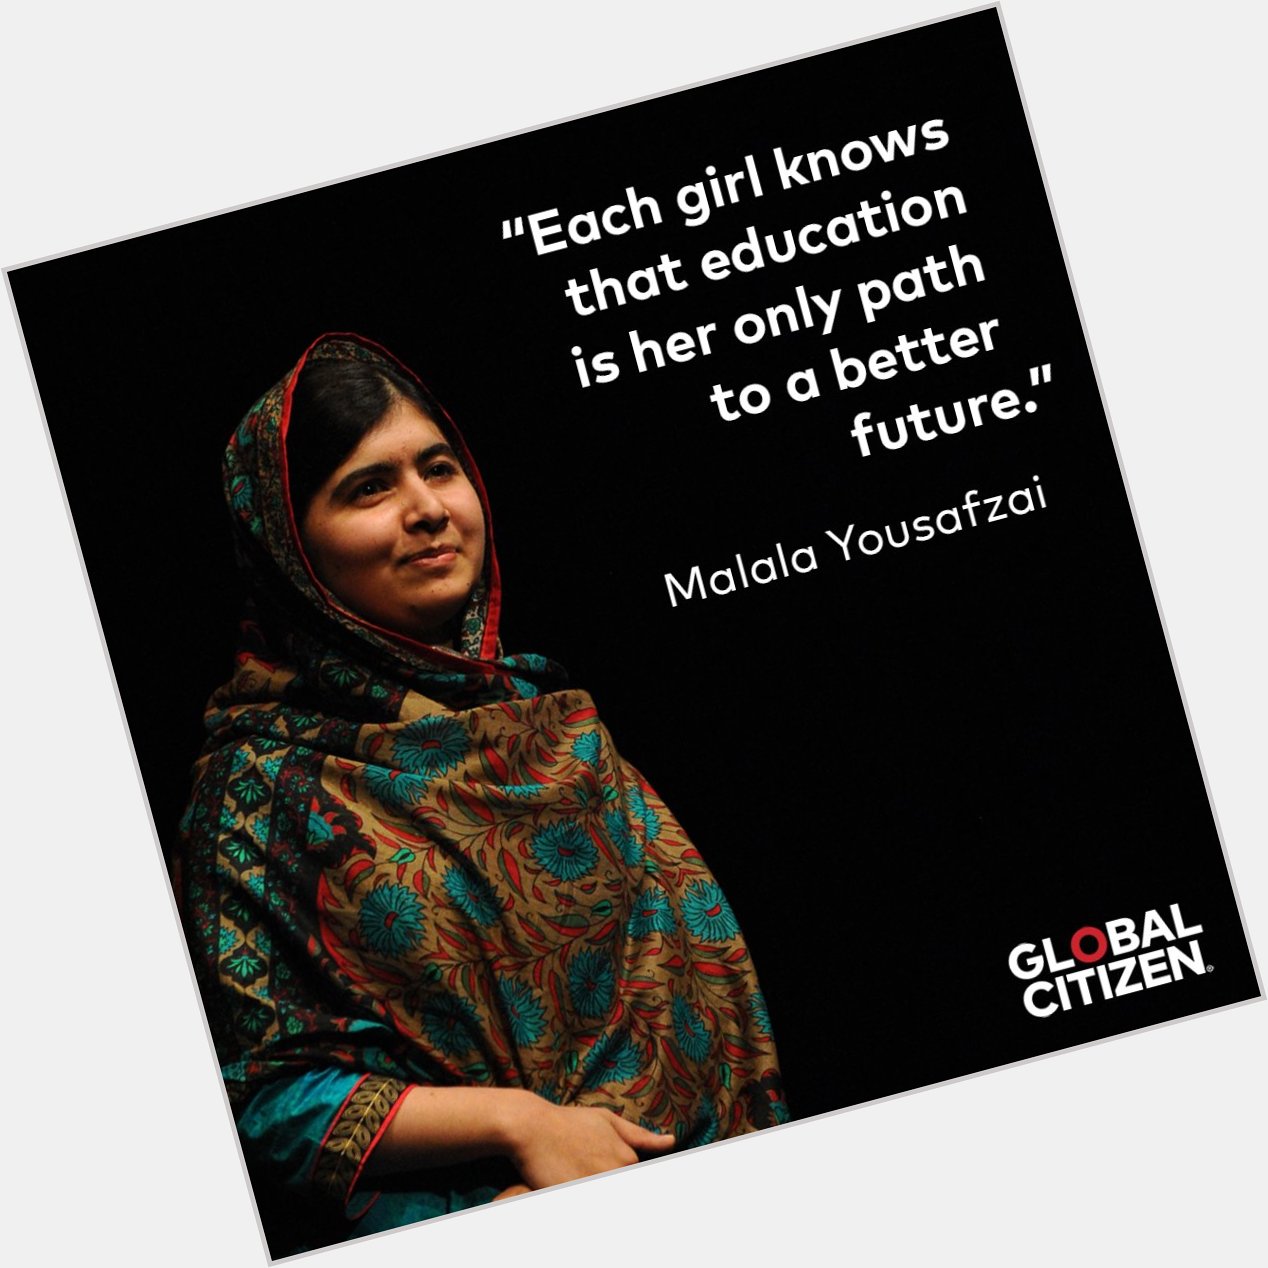 Wishing a very happy 21st birthday to education activist and Nobel Peace Prize winner Yousafzai! 